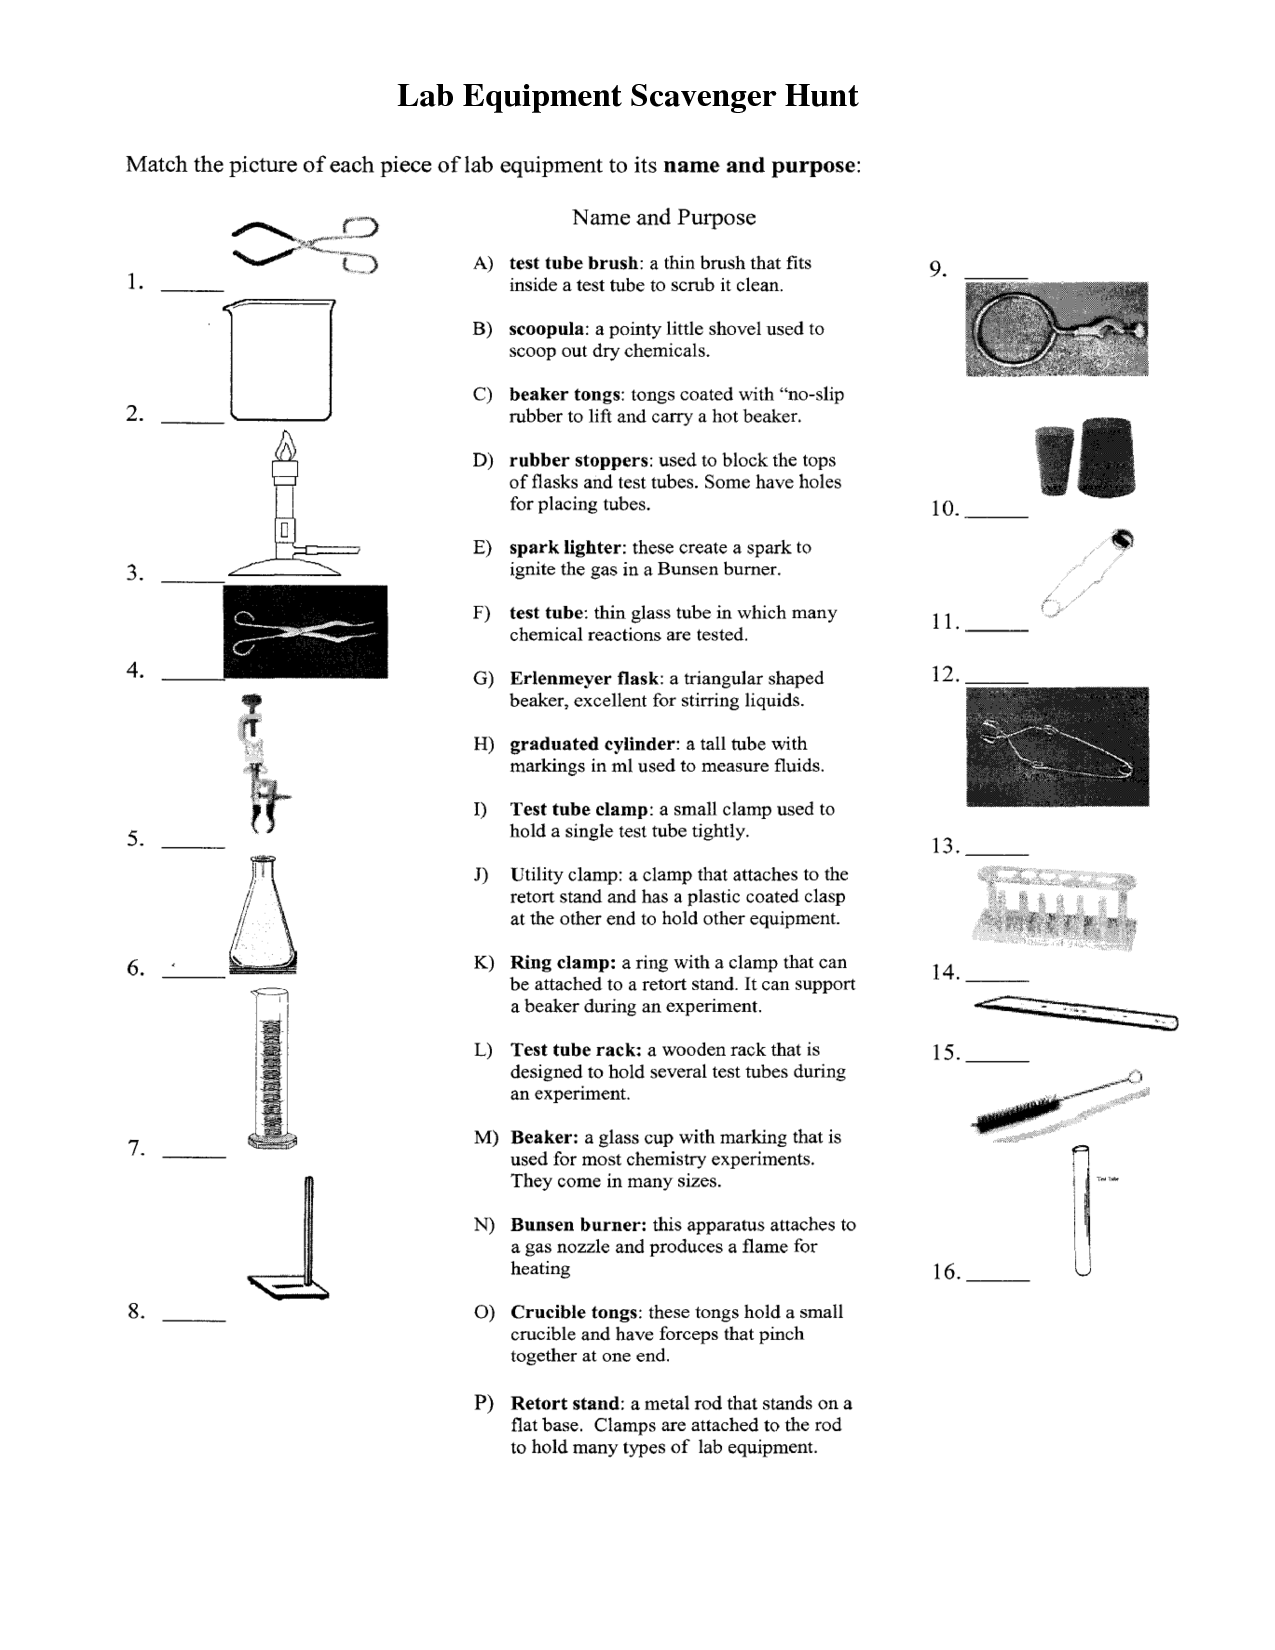 12 Best Images of Laboratory Equipment Worksheet - Science Lab ...